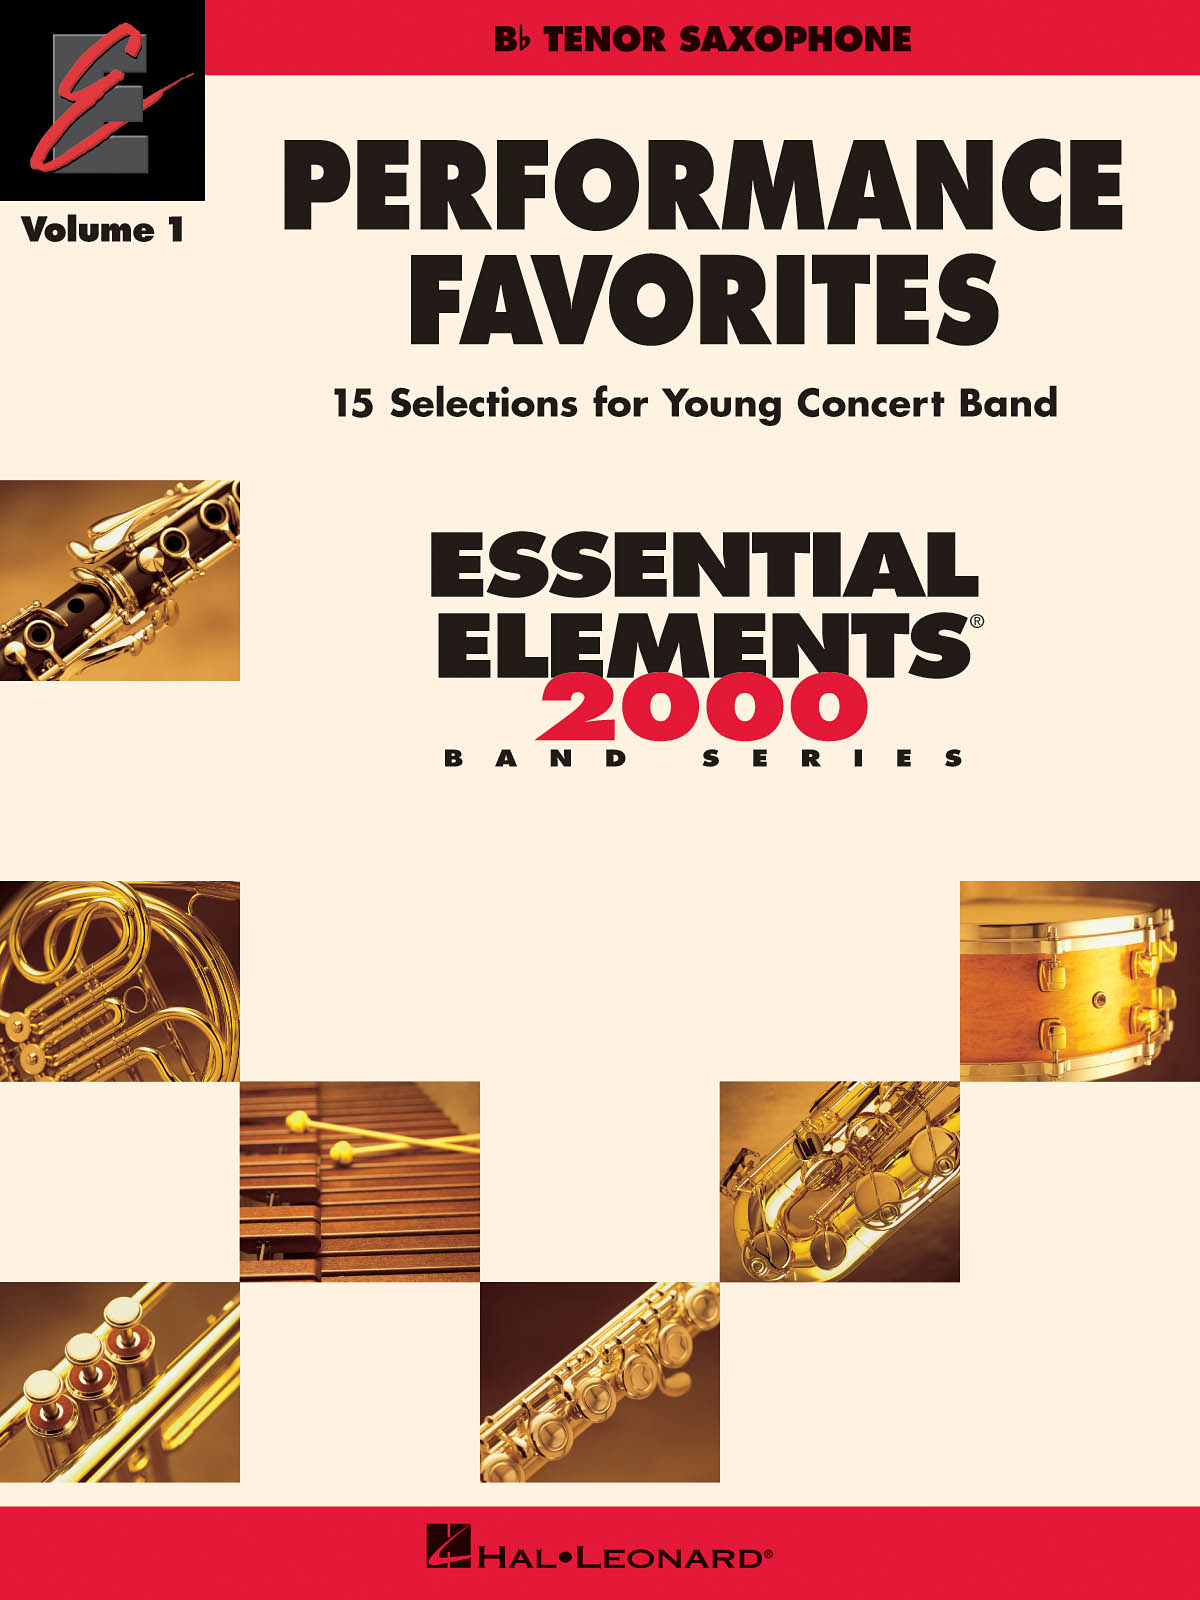 Performance Favorites Vol. 1 - Tenor Sax - 15 Selections for Young Concert Band - noty pro tenor saxofon